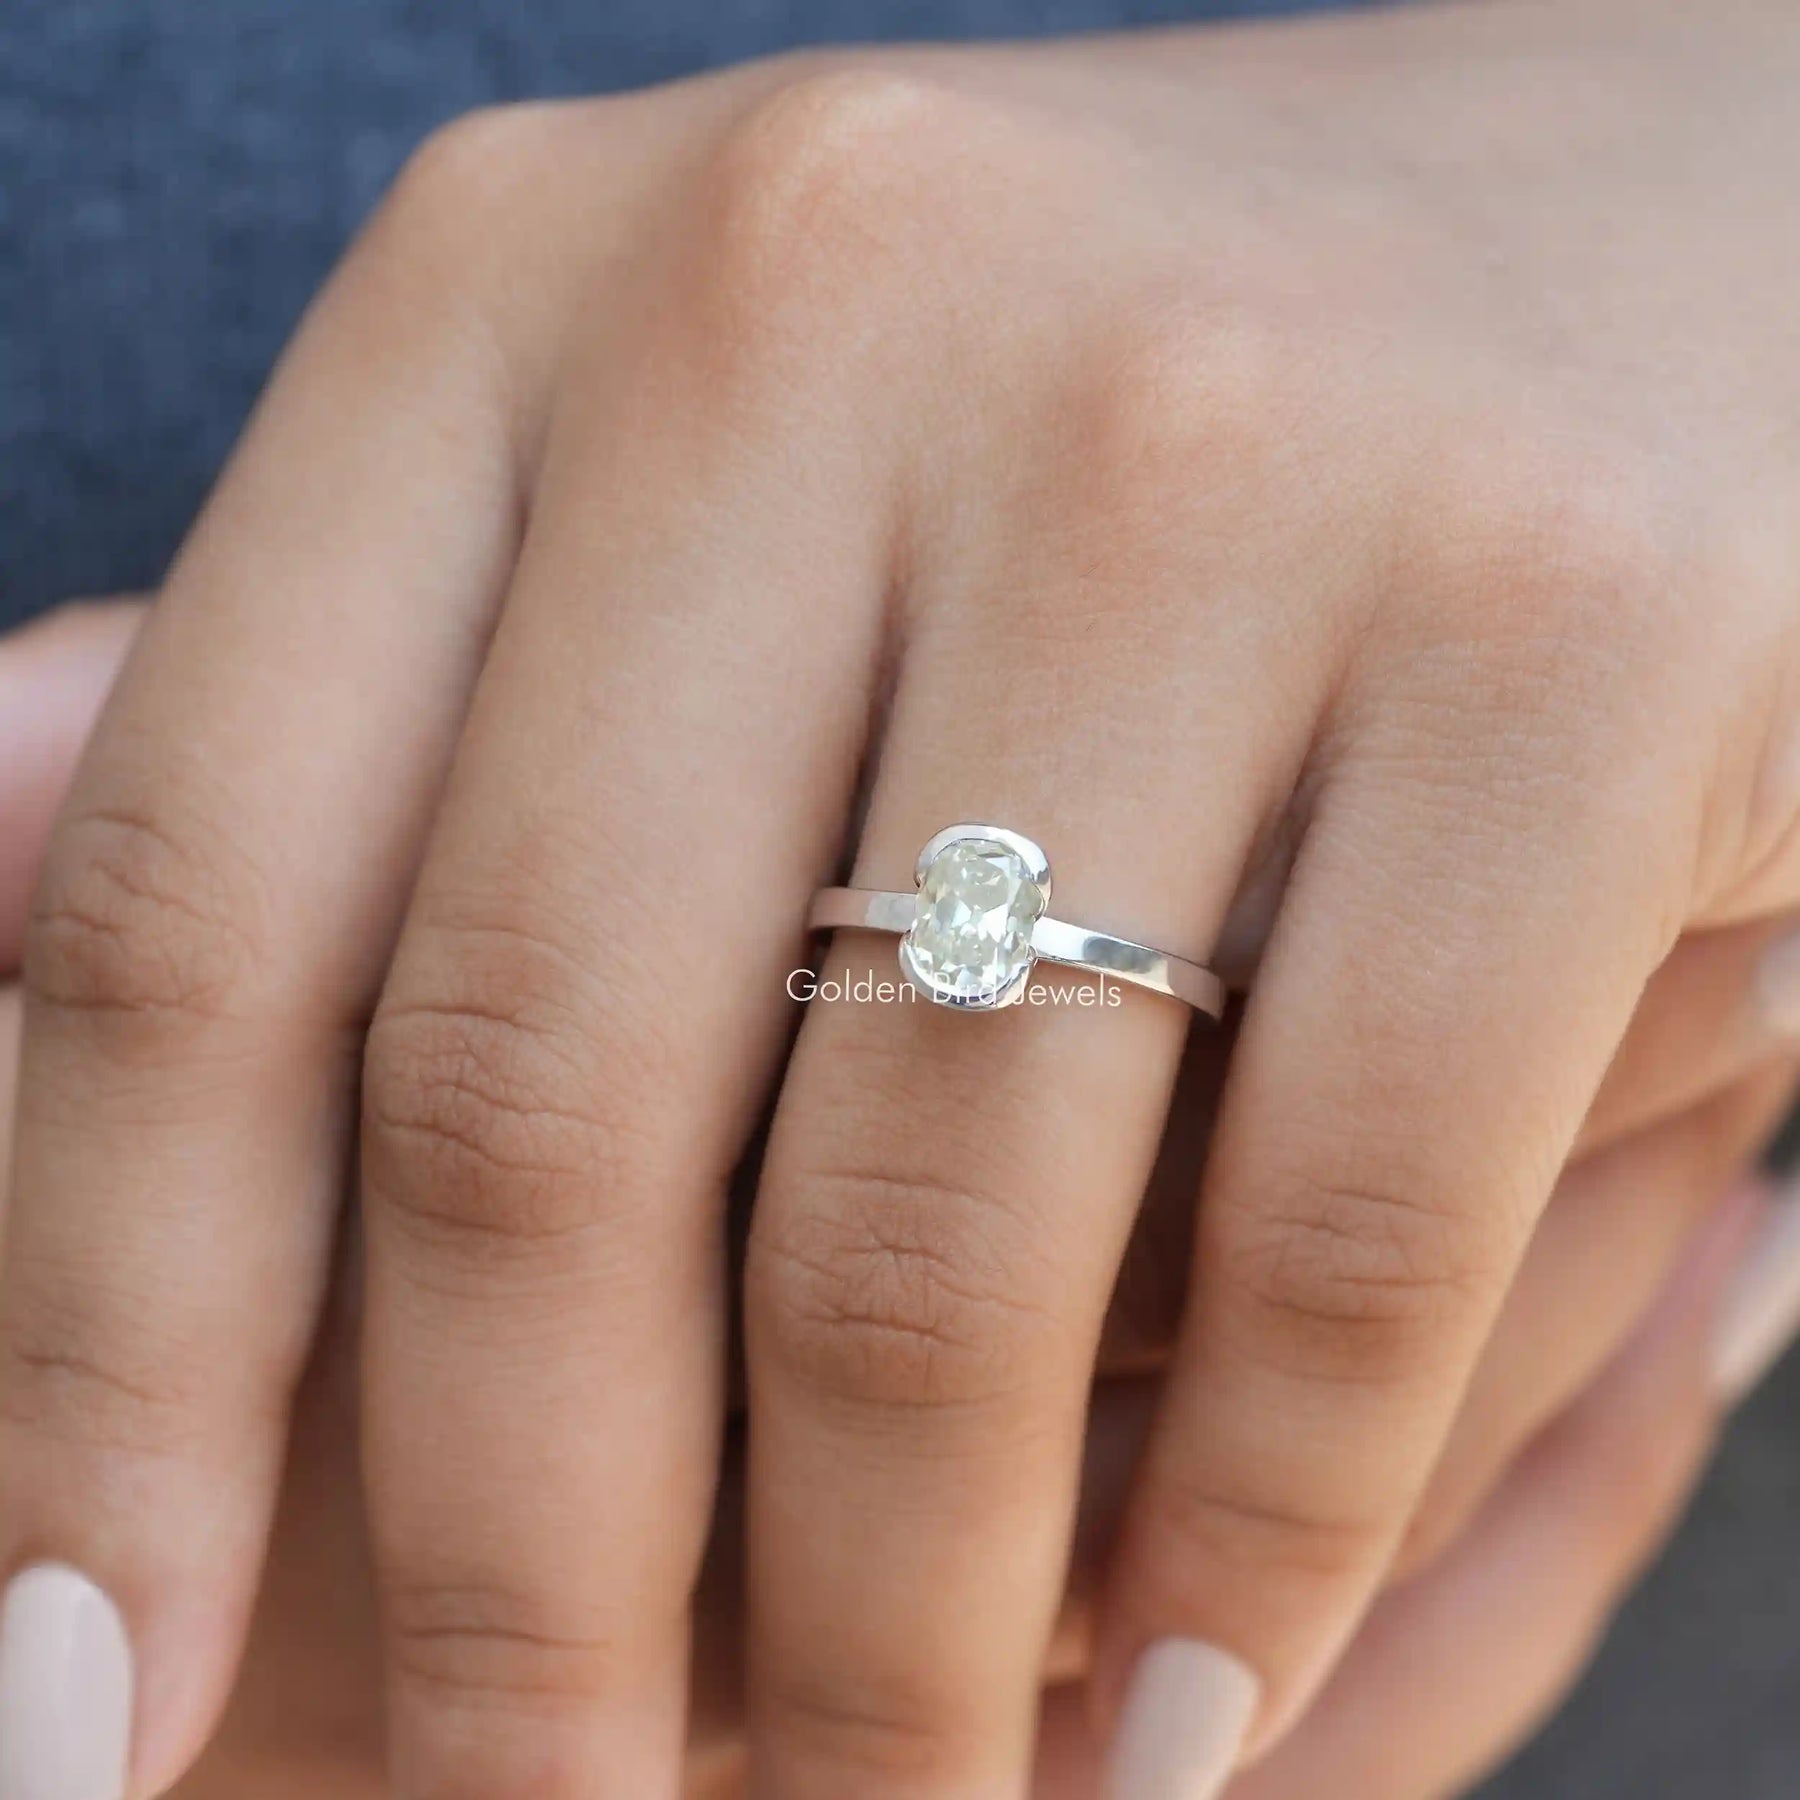 [Moissanite Solitaire Engagement Ring Made Of Old Mine Cushion Cut Stone]-[Golden Bird Jewels] 